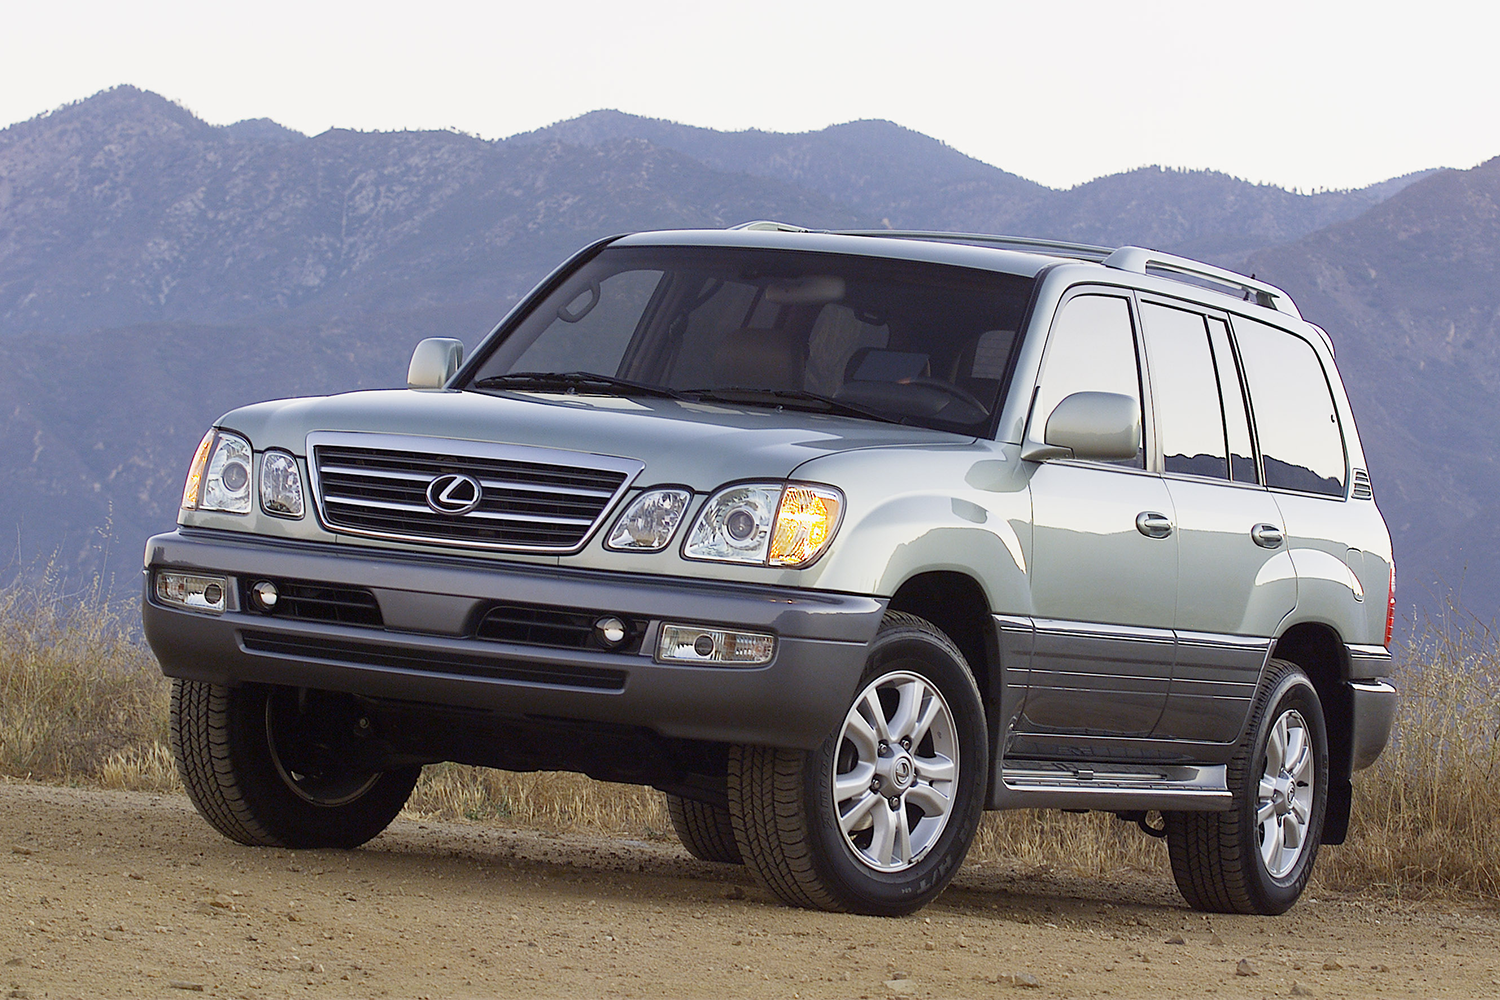 Used Lexus LX 470 for Sale with Photos  CARFAX